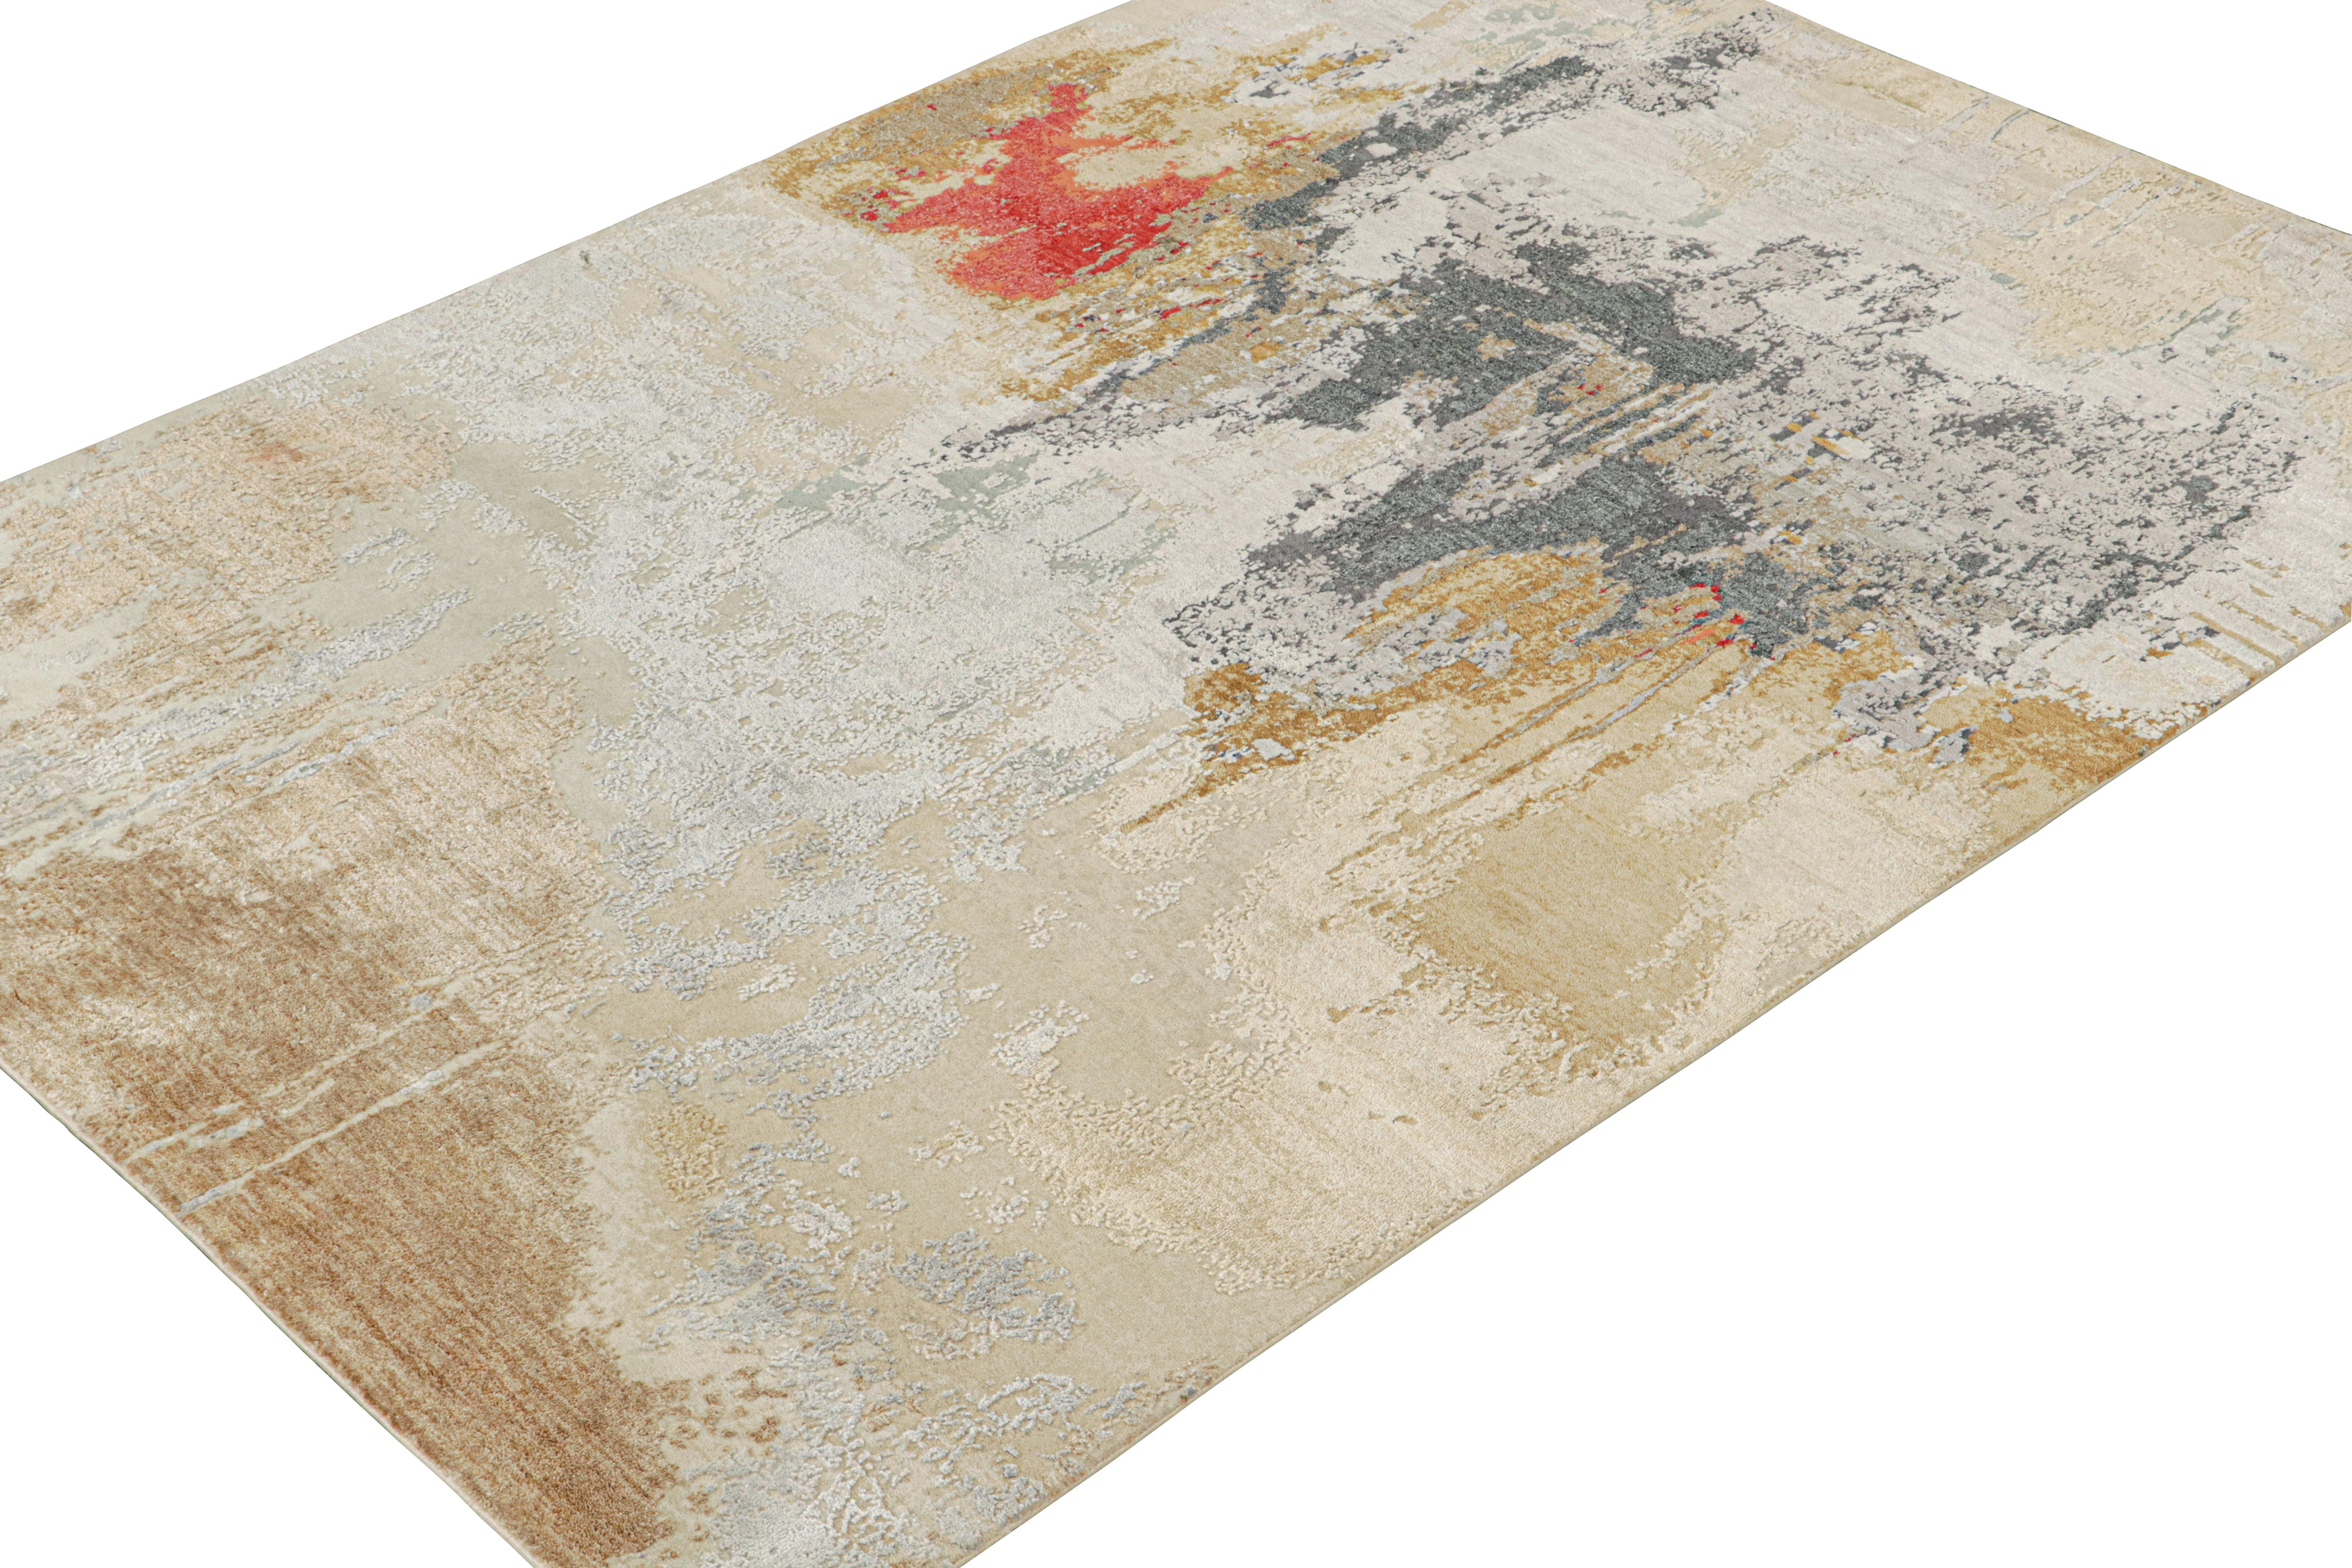 Indian Rug & Kilim’s Modern Abstract Rug in Beige-Brown, Gray and Red For Sale